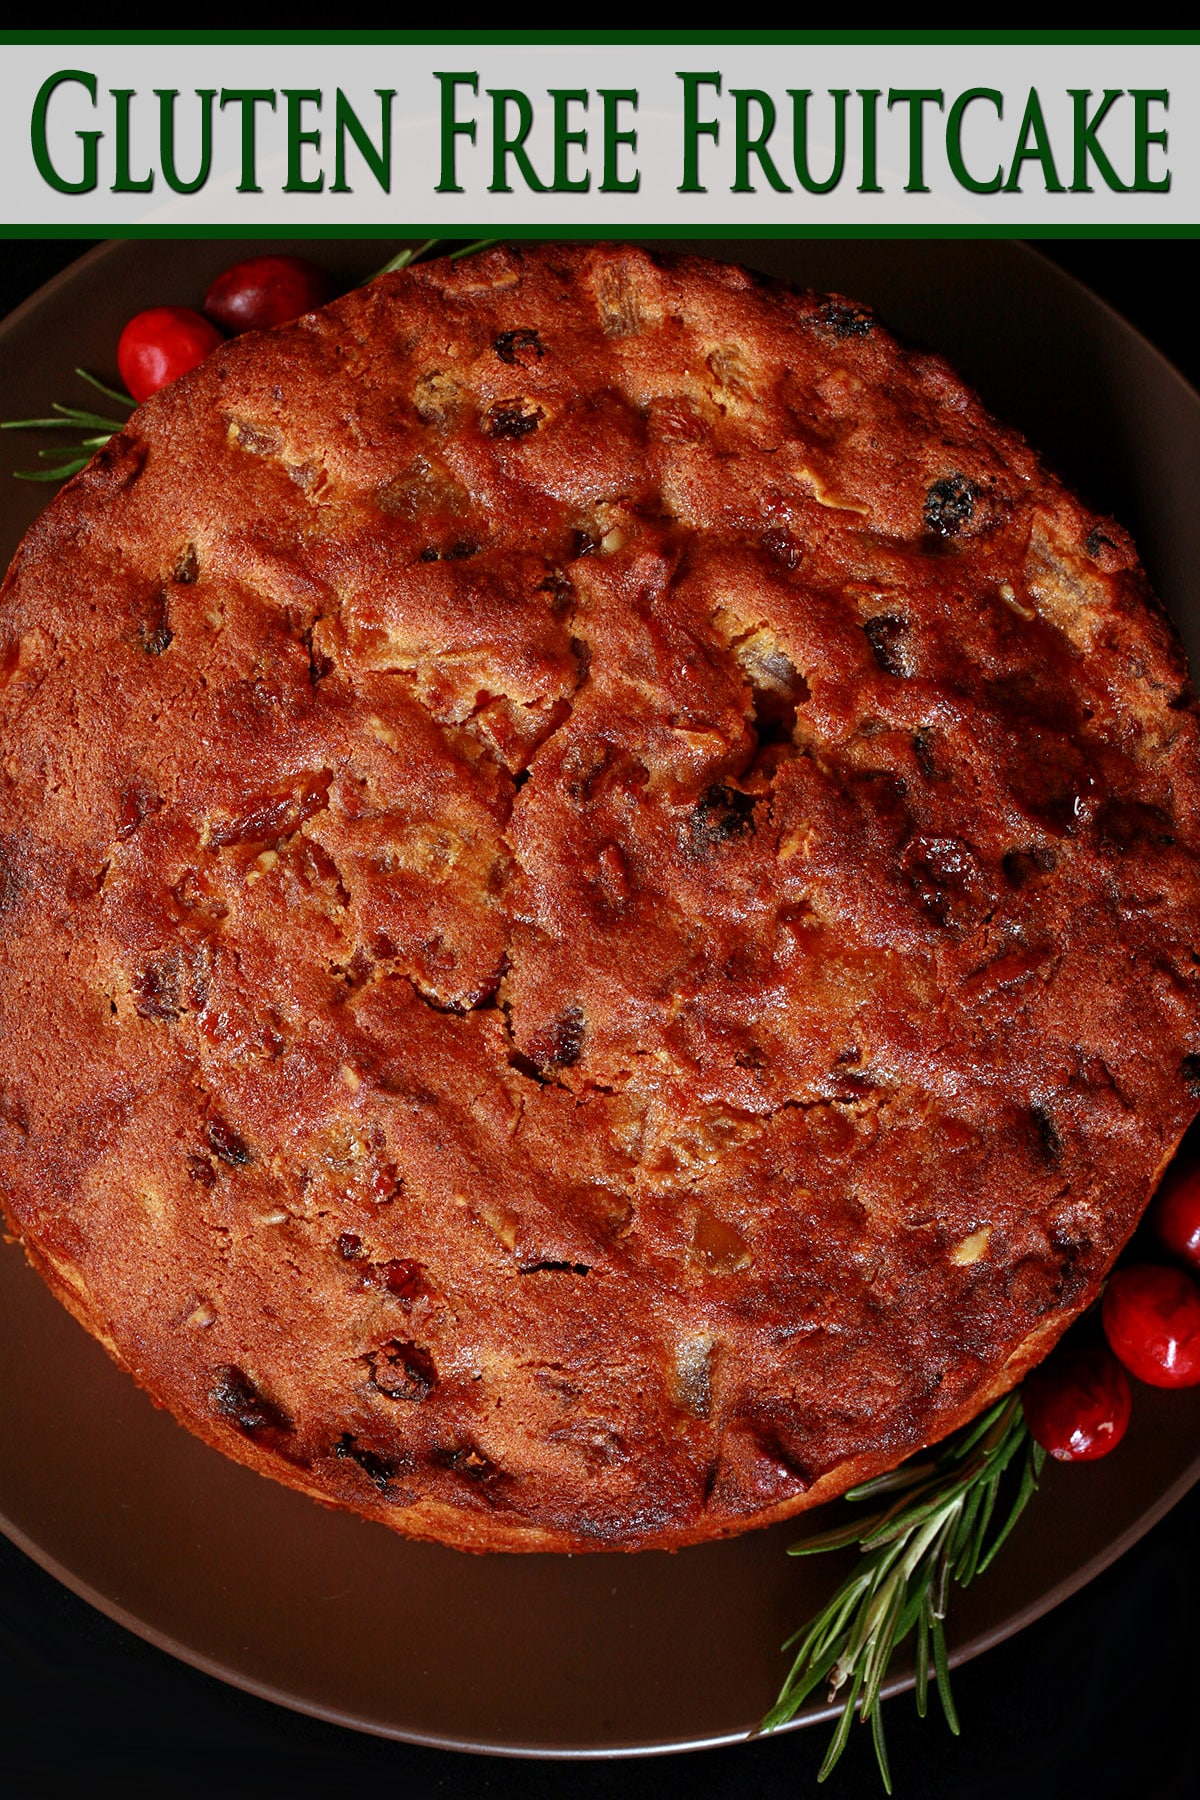 A whole gluten free fruitcake, with rosemary and cranberries beside it.